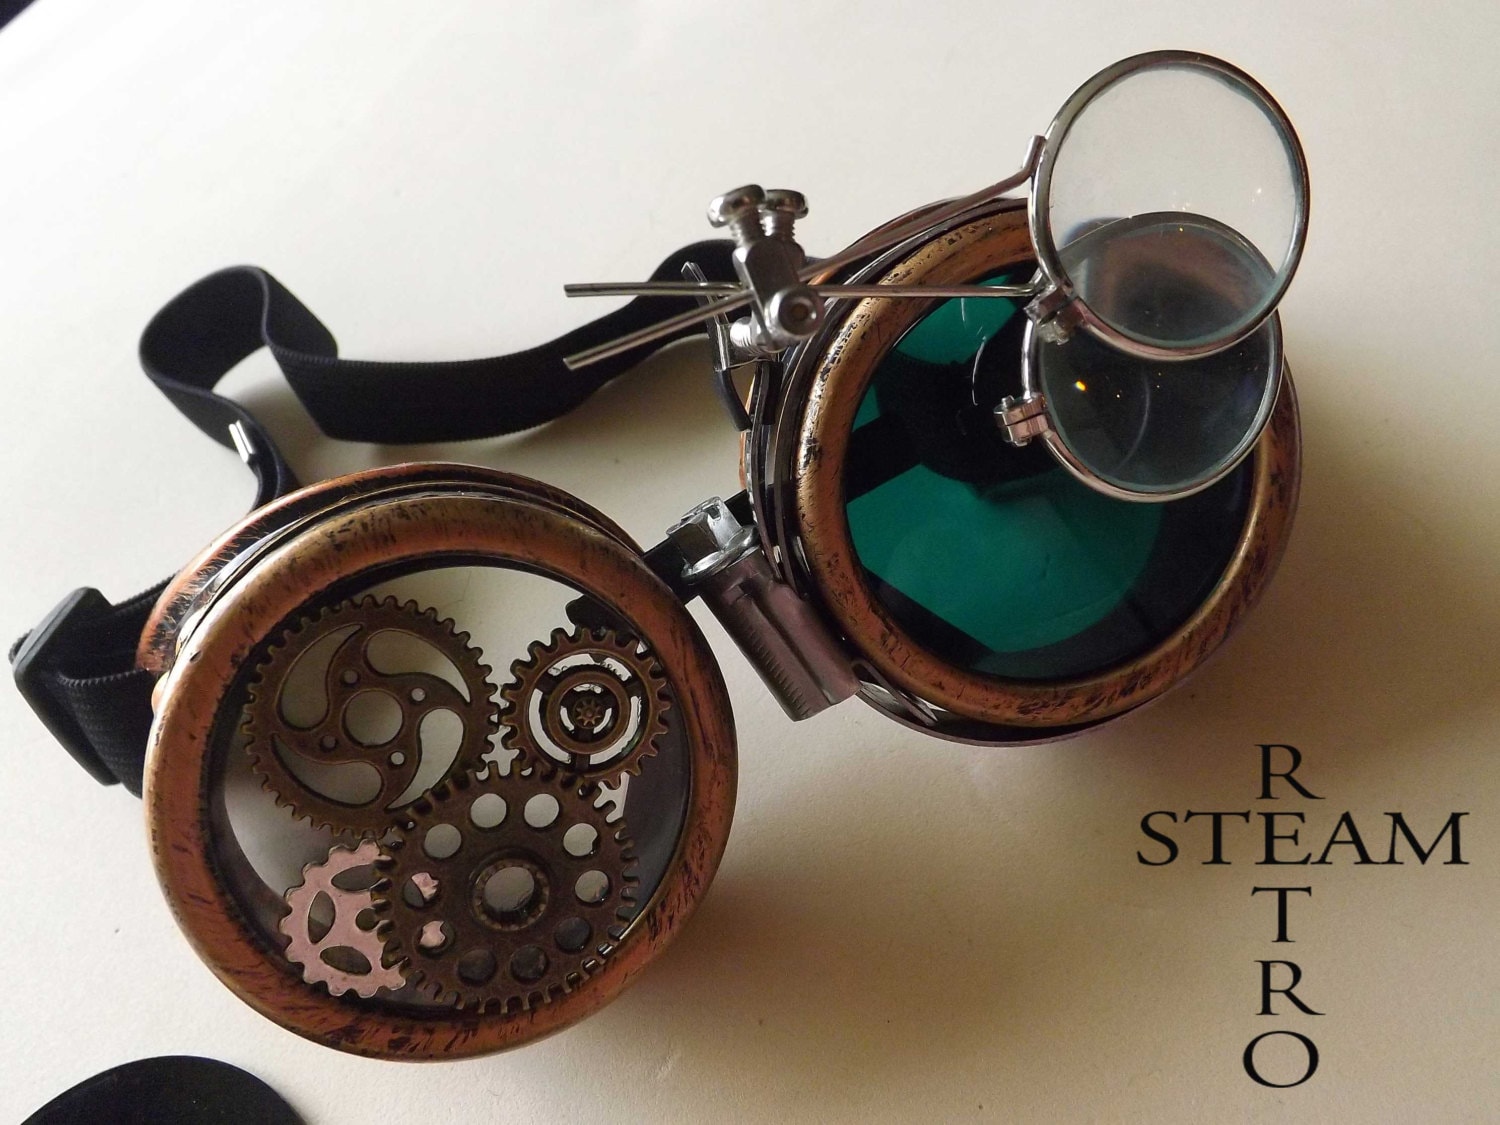 Steampunk Goggles, Vintage Goggles, Victorian Goggles, Aviator Goggles,  Steampunk Glasses, Engineer Goggles, Cosplay Goggles 